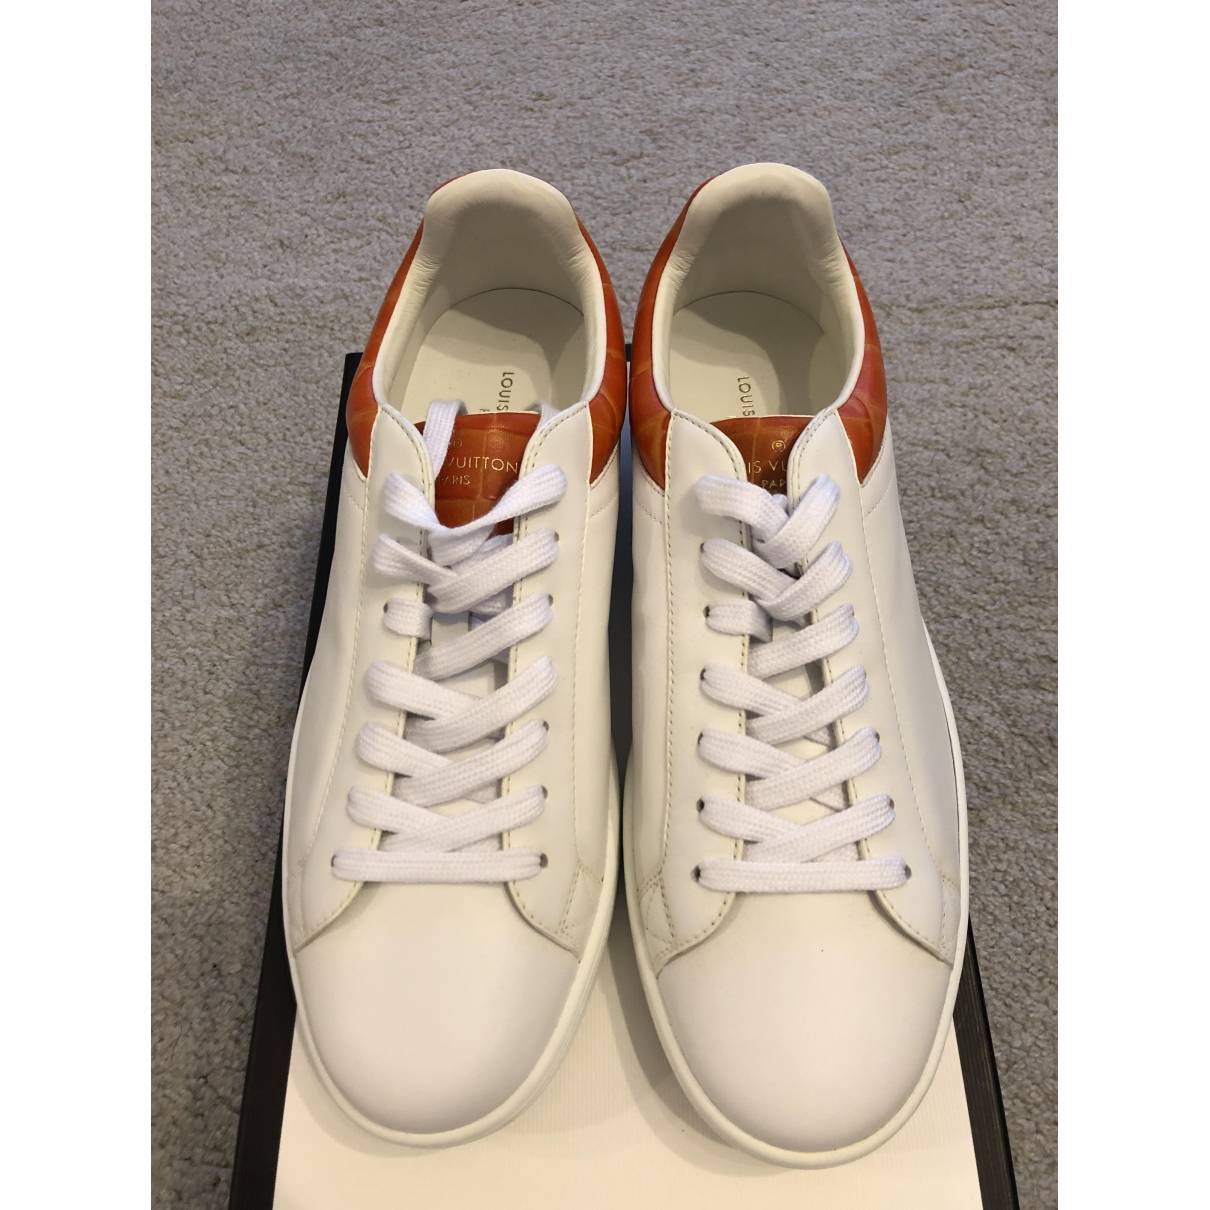 Luxembourg leather low trainers Louis Vuitton White size 10 UK in Leather -  11770467